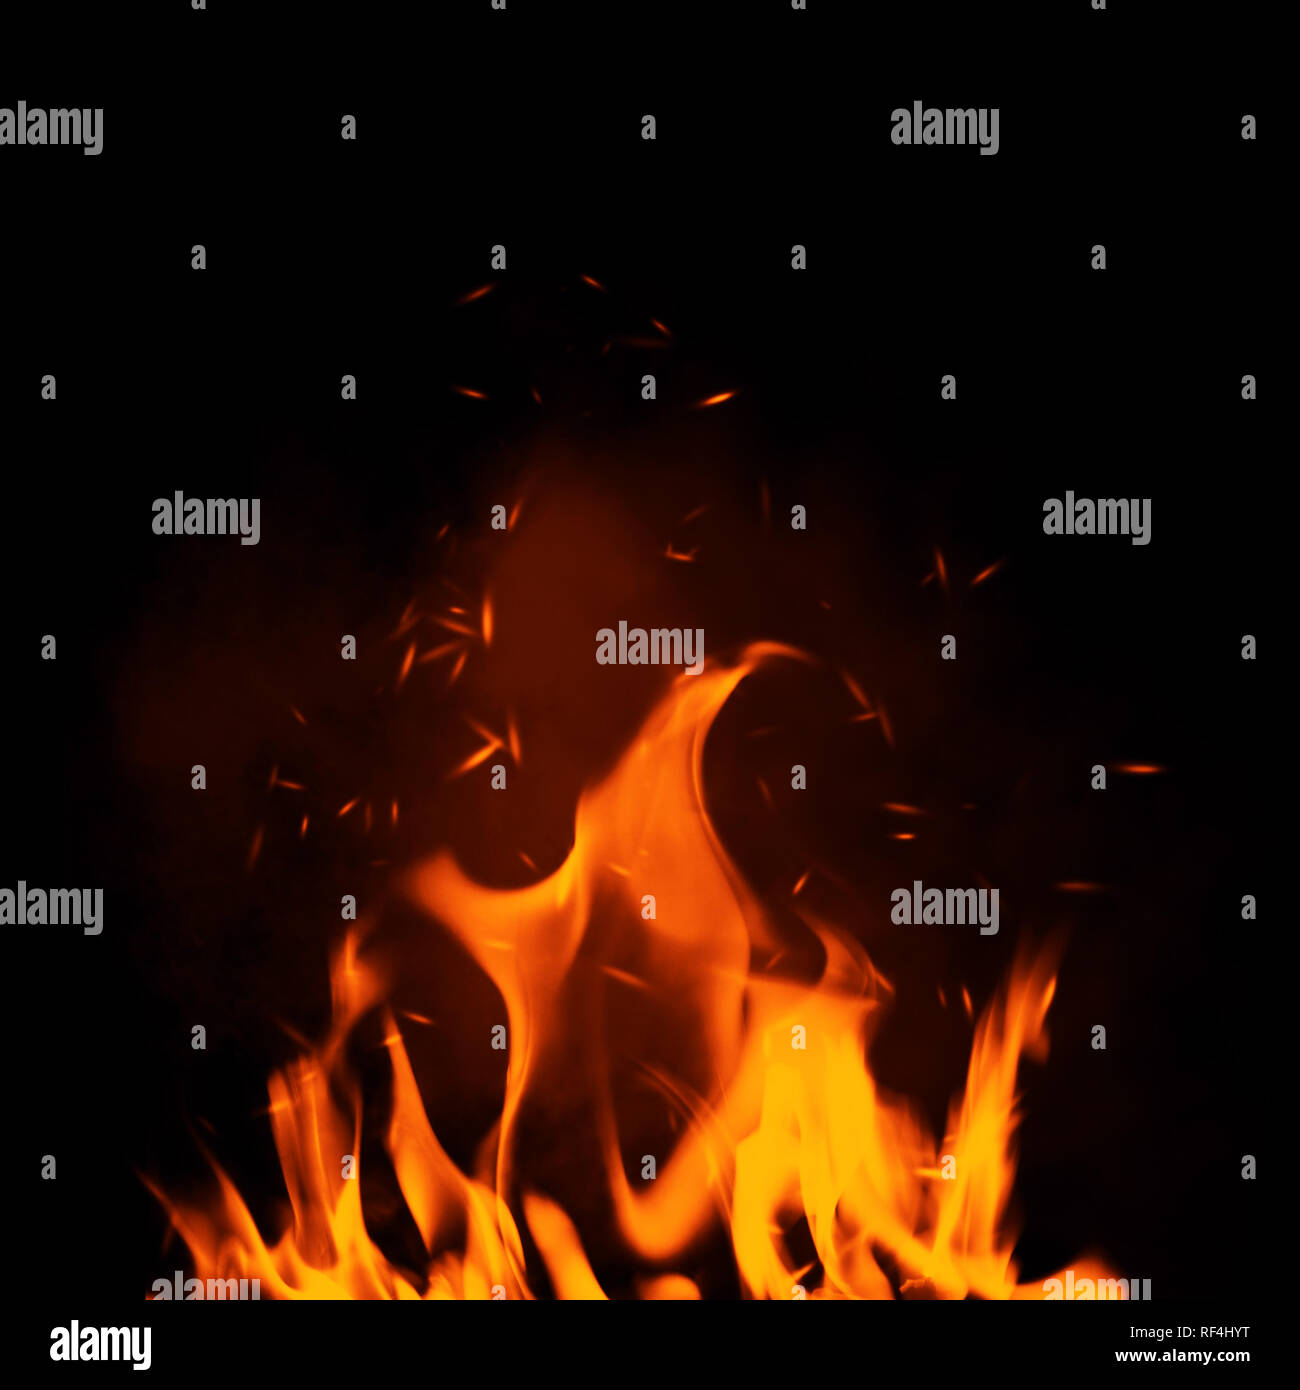 Texture of burn fire with particles embers. Flames on isolated black background. Stock Photo